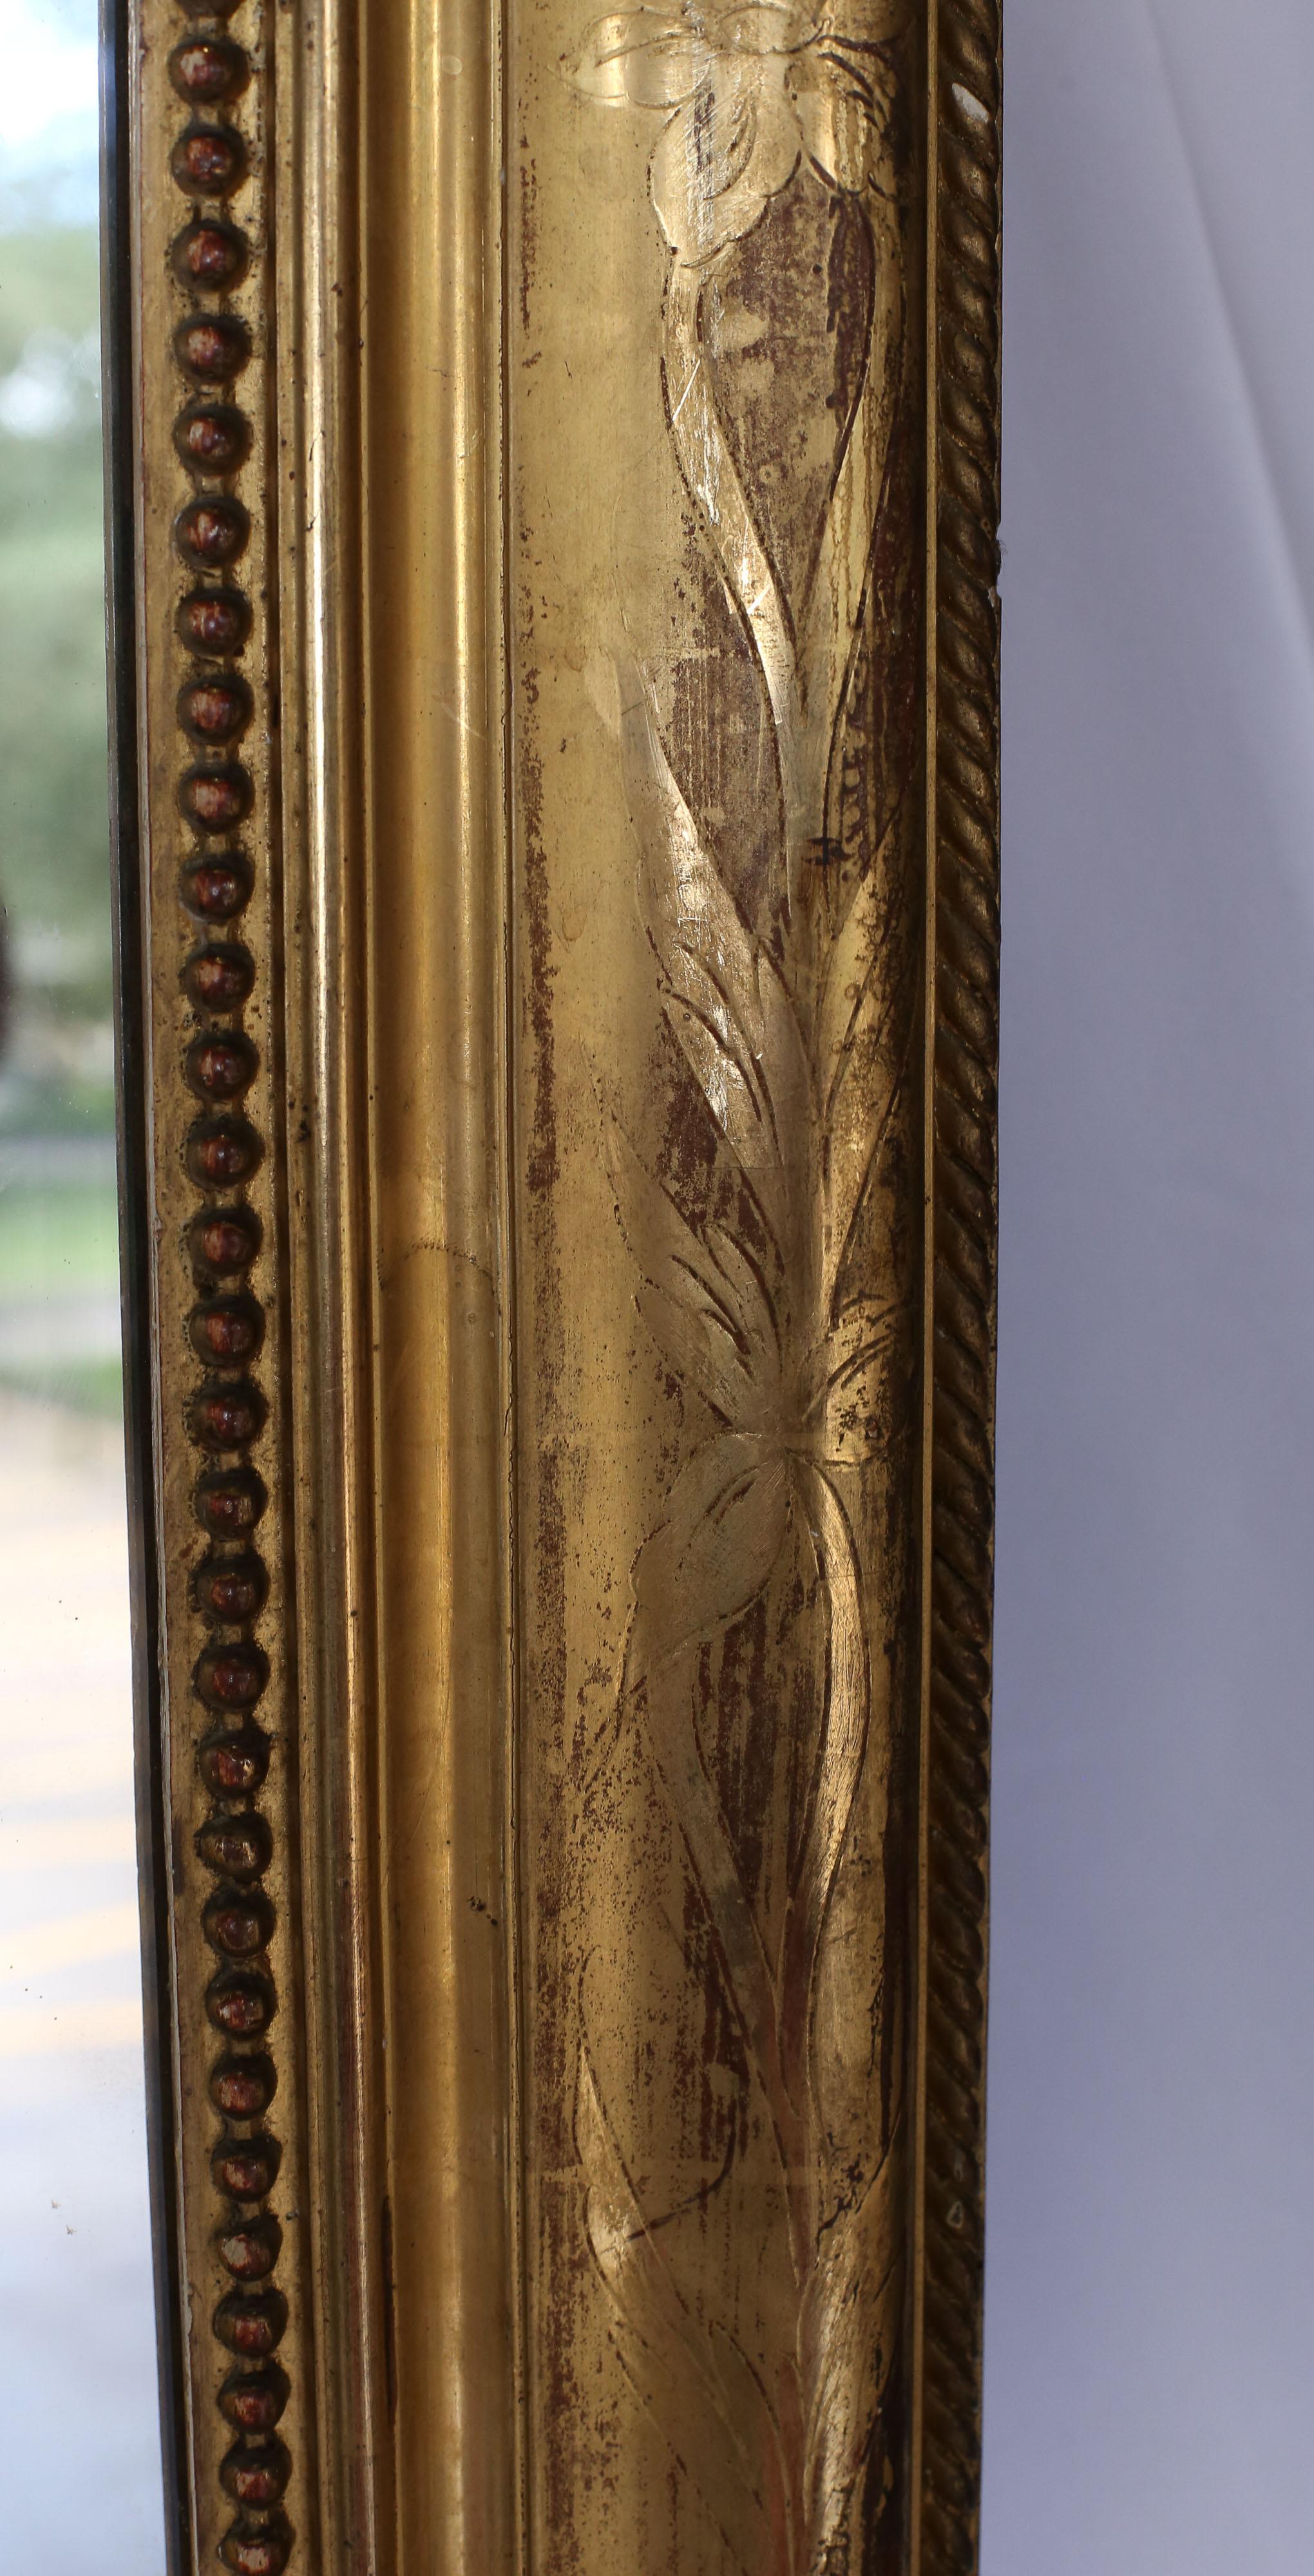 19th century Louis Philippe gilt mirror with beautiful floral etching and a rope perimeter on the exterior. The interior detail includes a pearl rope nearest to the glass.